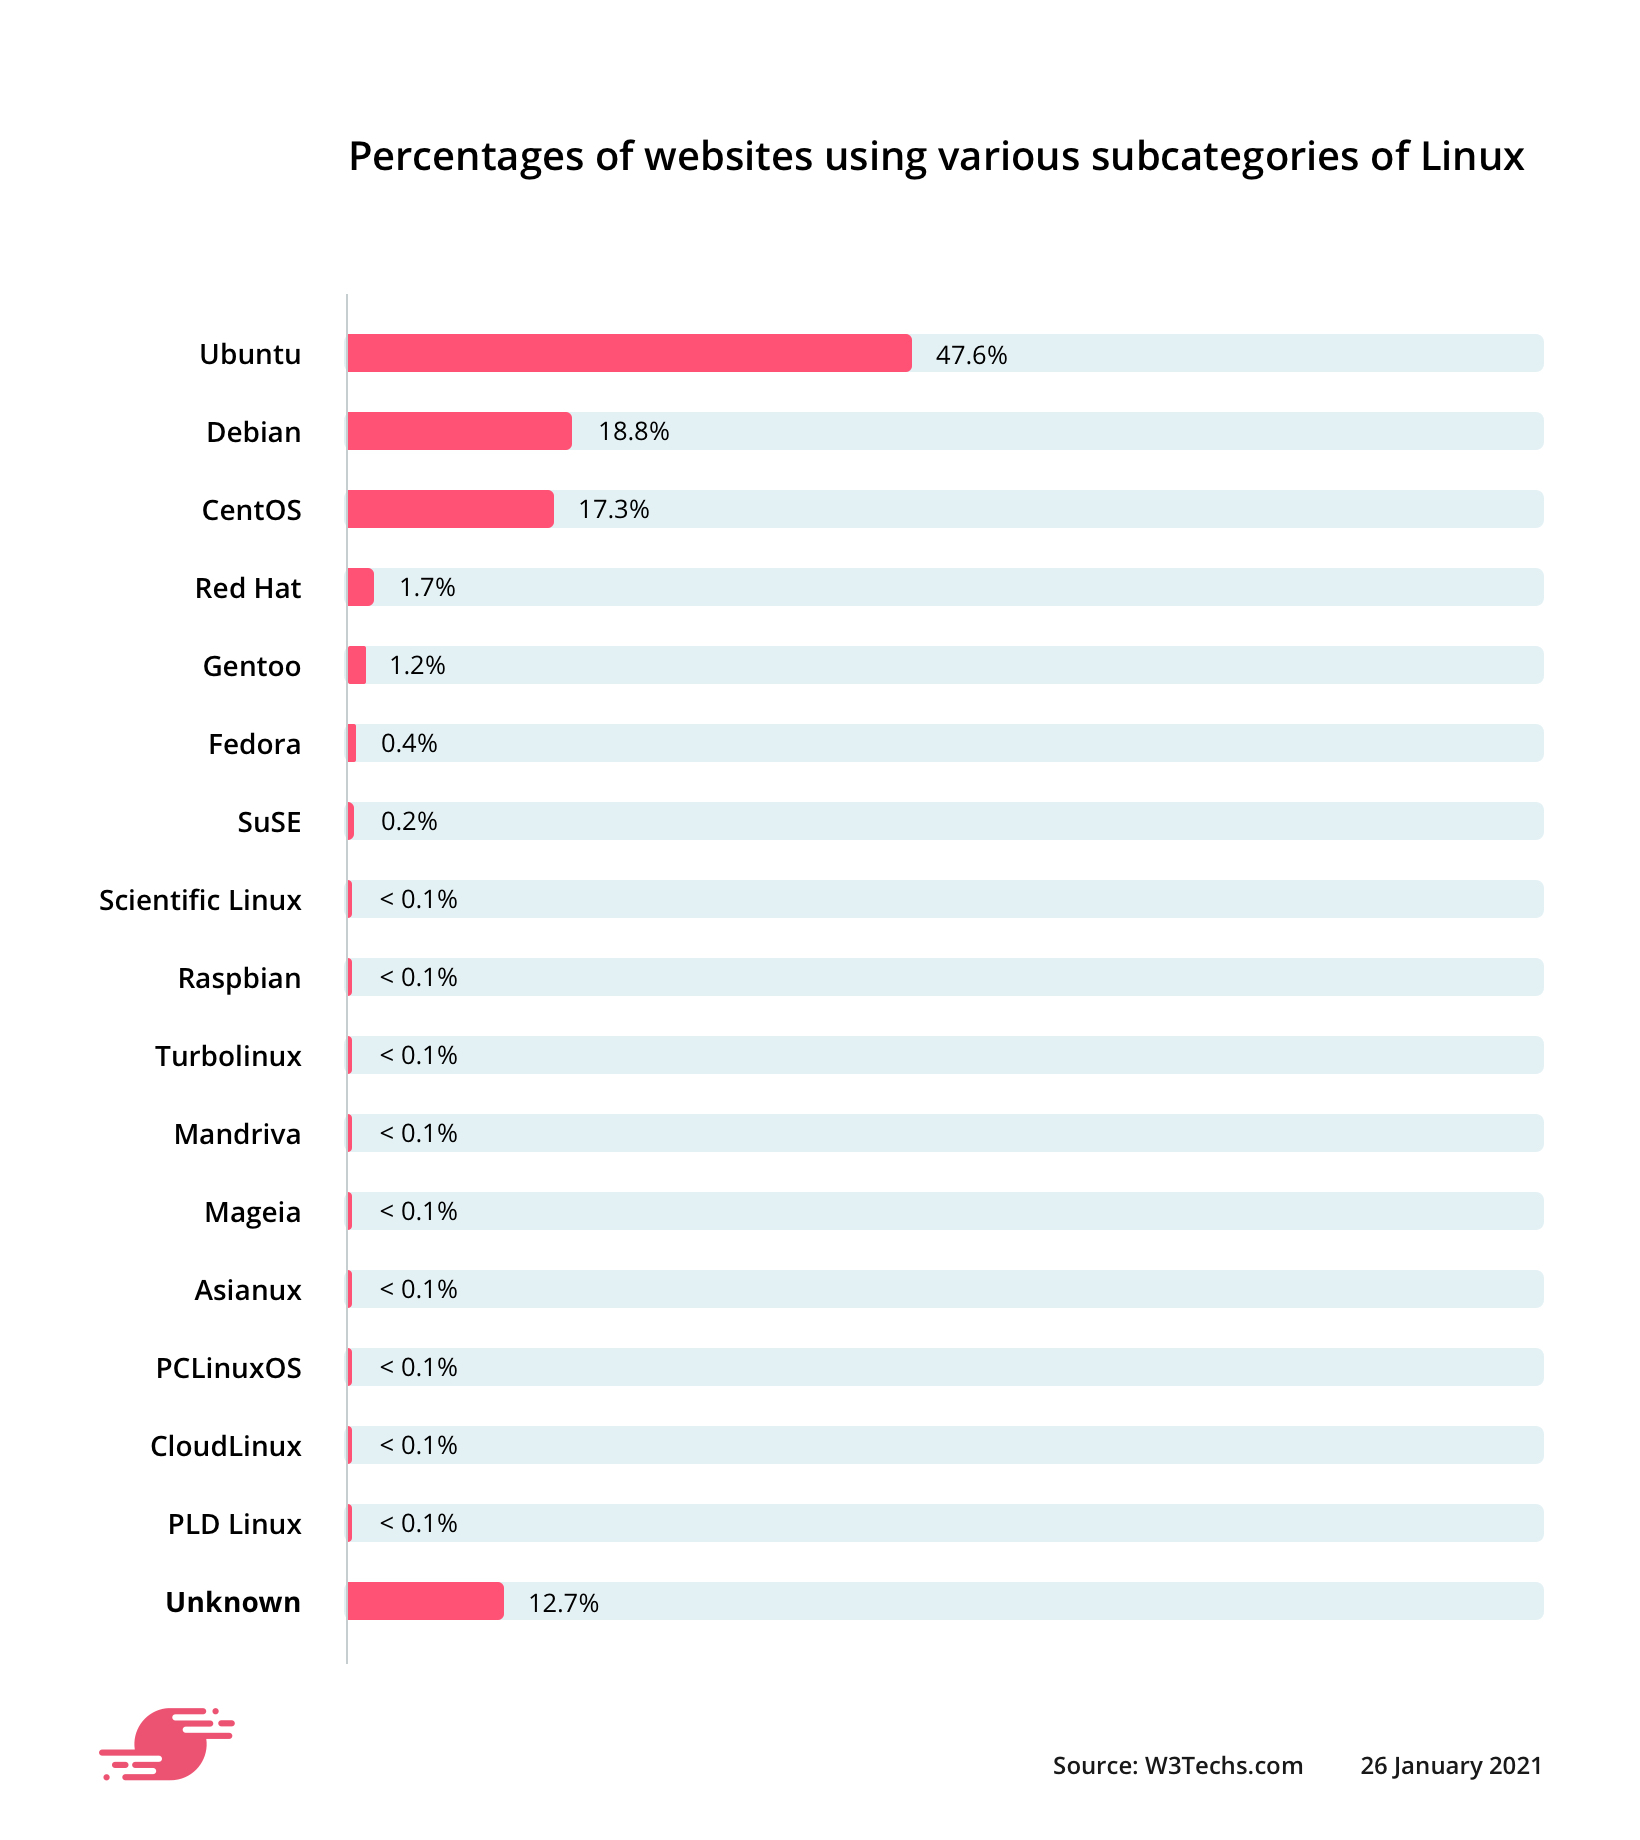 Percentages of websites using subcategories of Linux